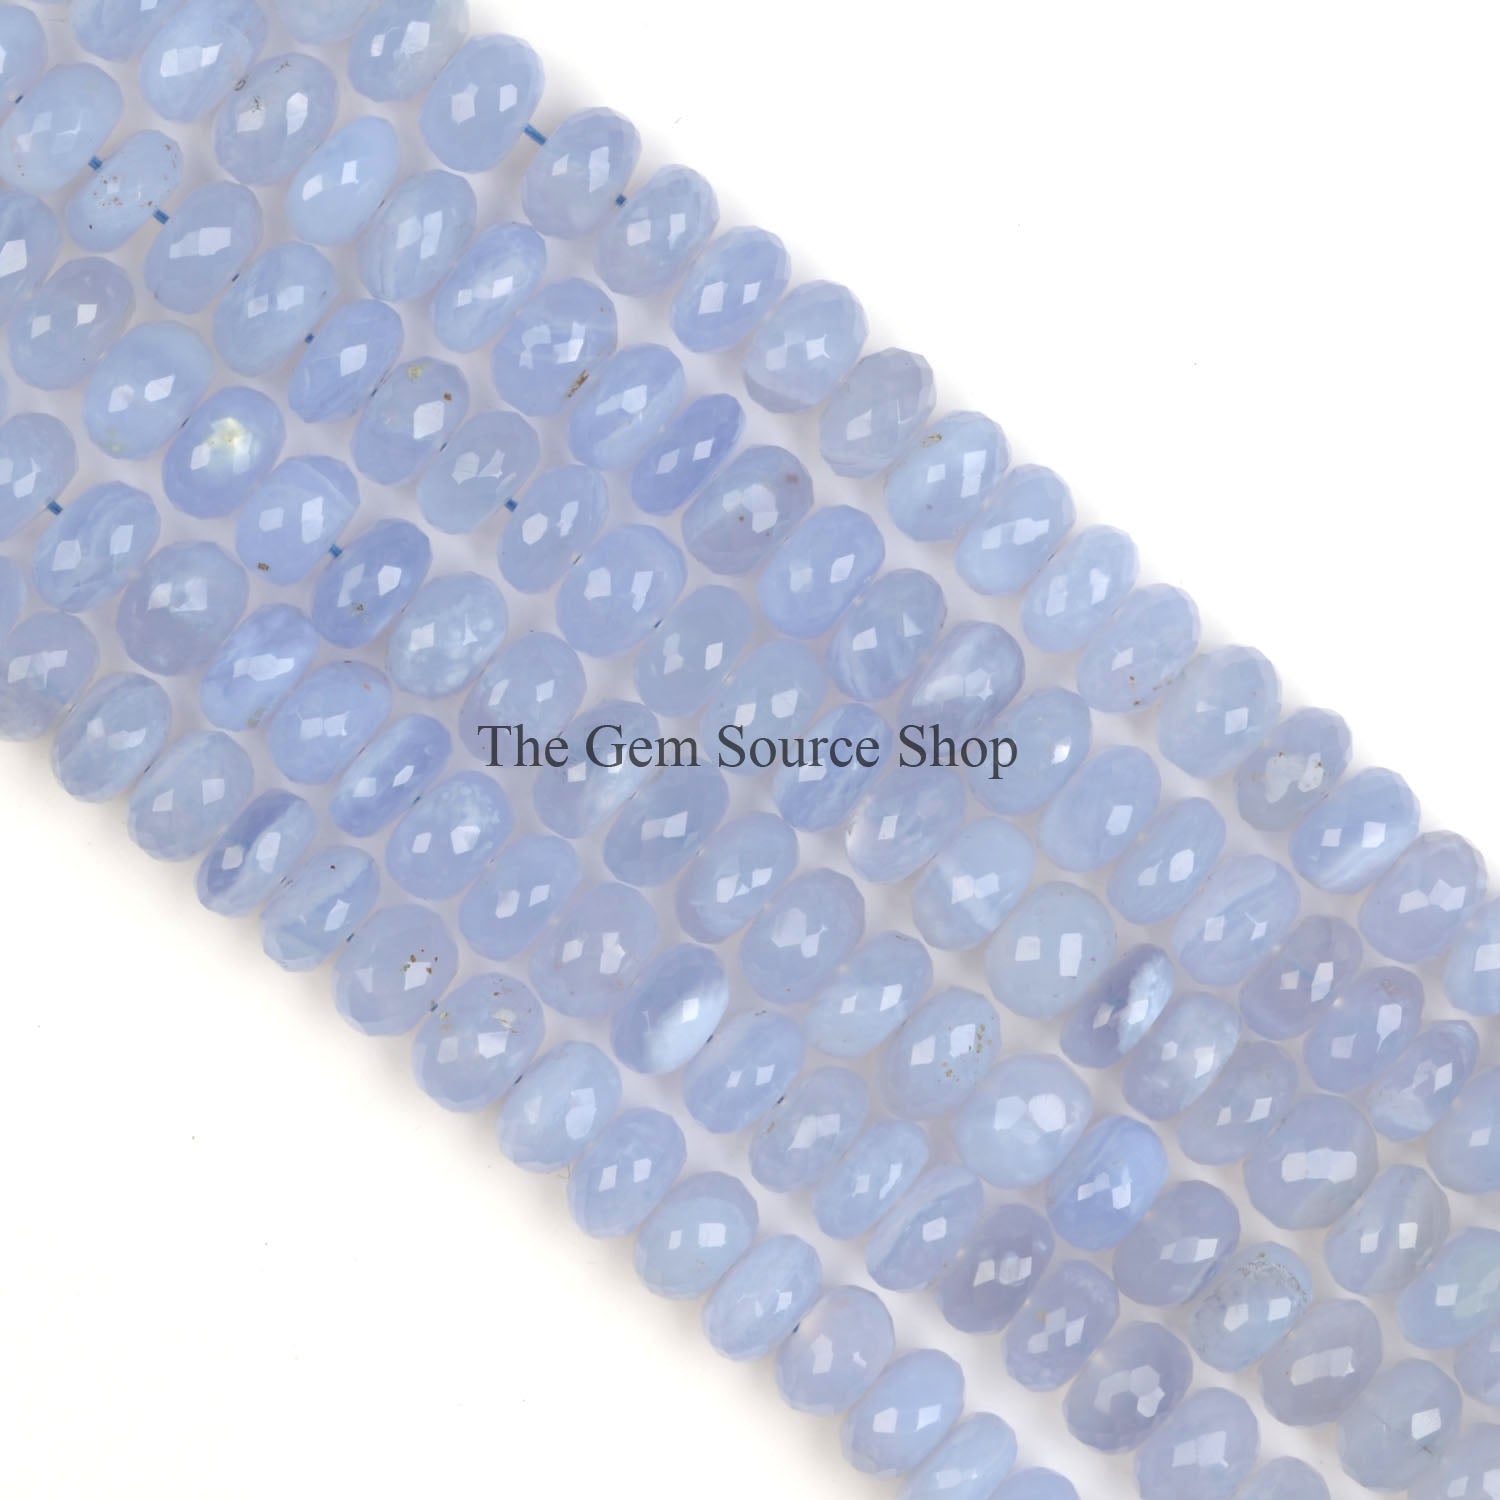 Chalcedony Beads, Chalcedony Faceted Beads, Chalcedony Rondelle Shape Beads, Gemstone Beads